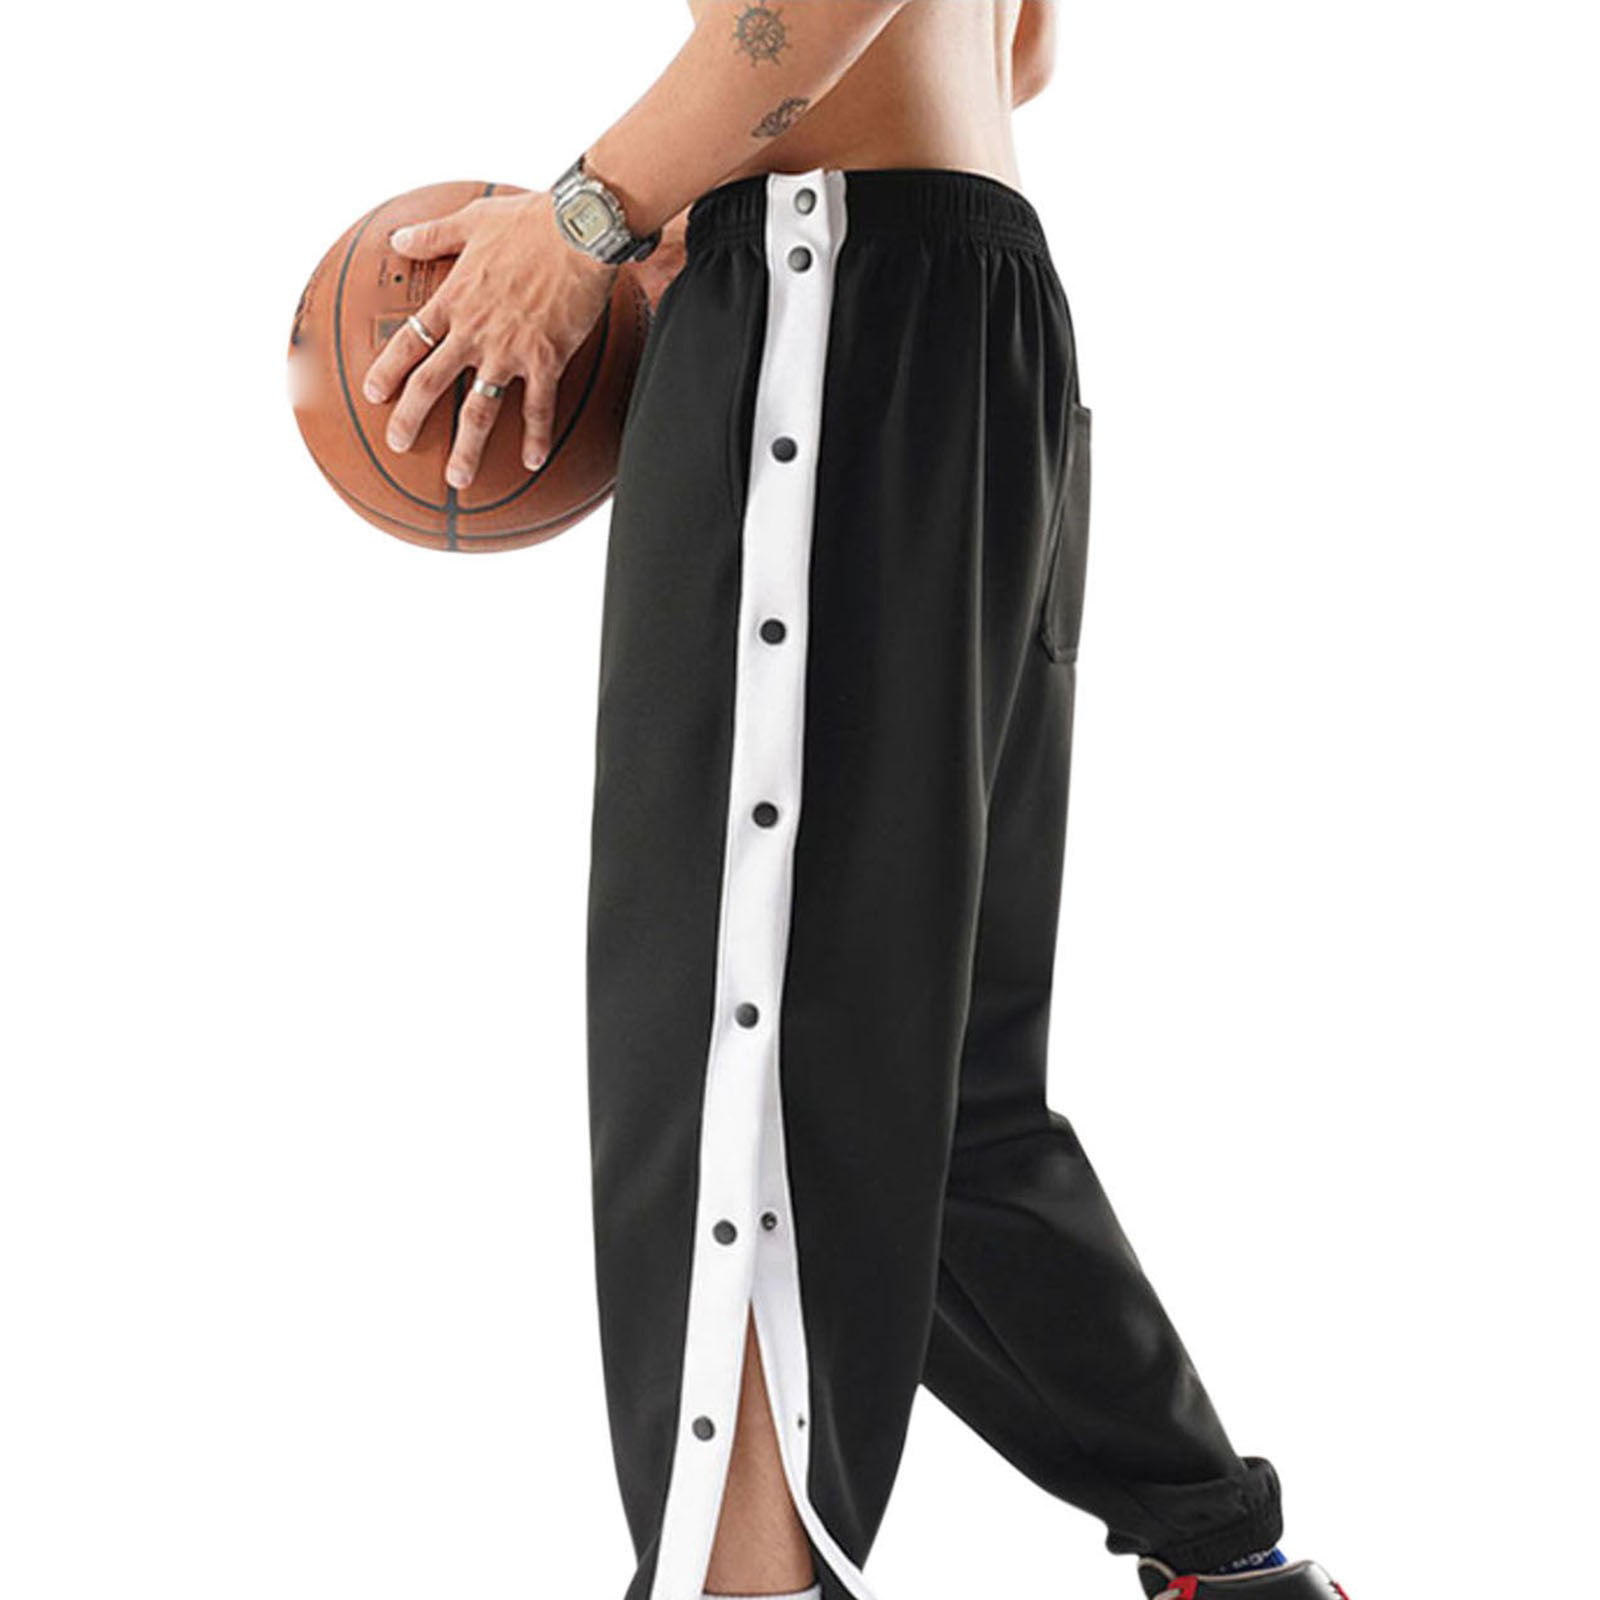 Mens Casual Pants Sides Bottons Sweatpants Loose Fit Trousers Basketball  Bottoms | eBay